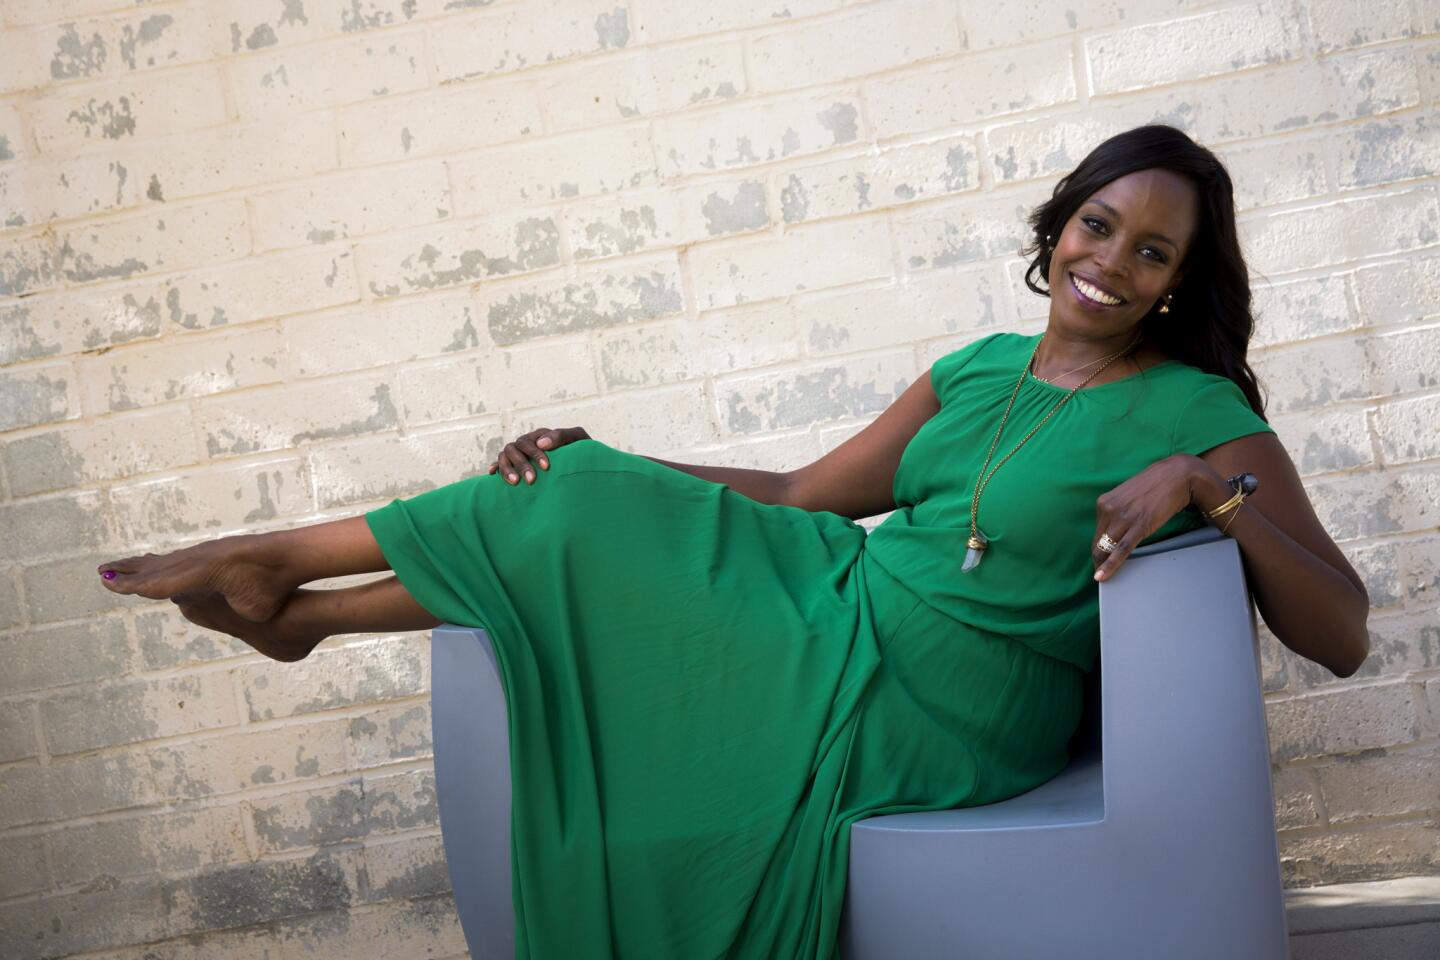 Nyakio founder, Nyakio Grieco, started her line of beauty products, which incorporate African ingredients.